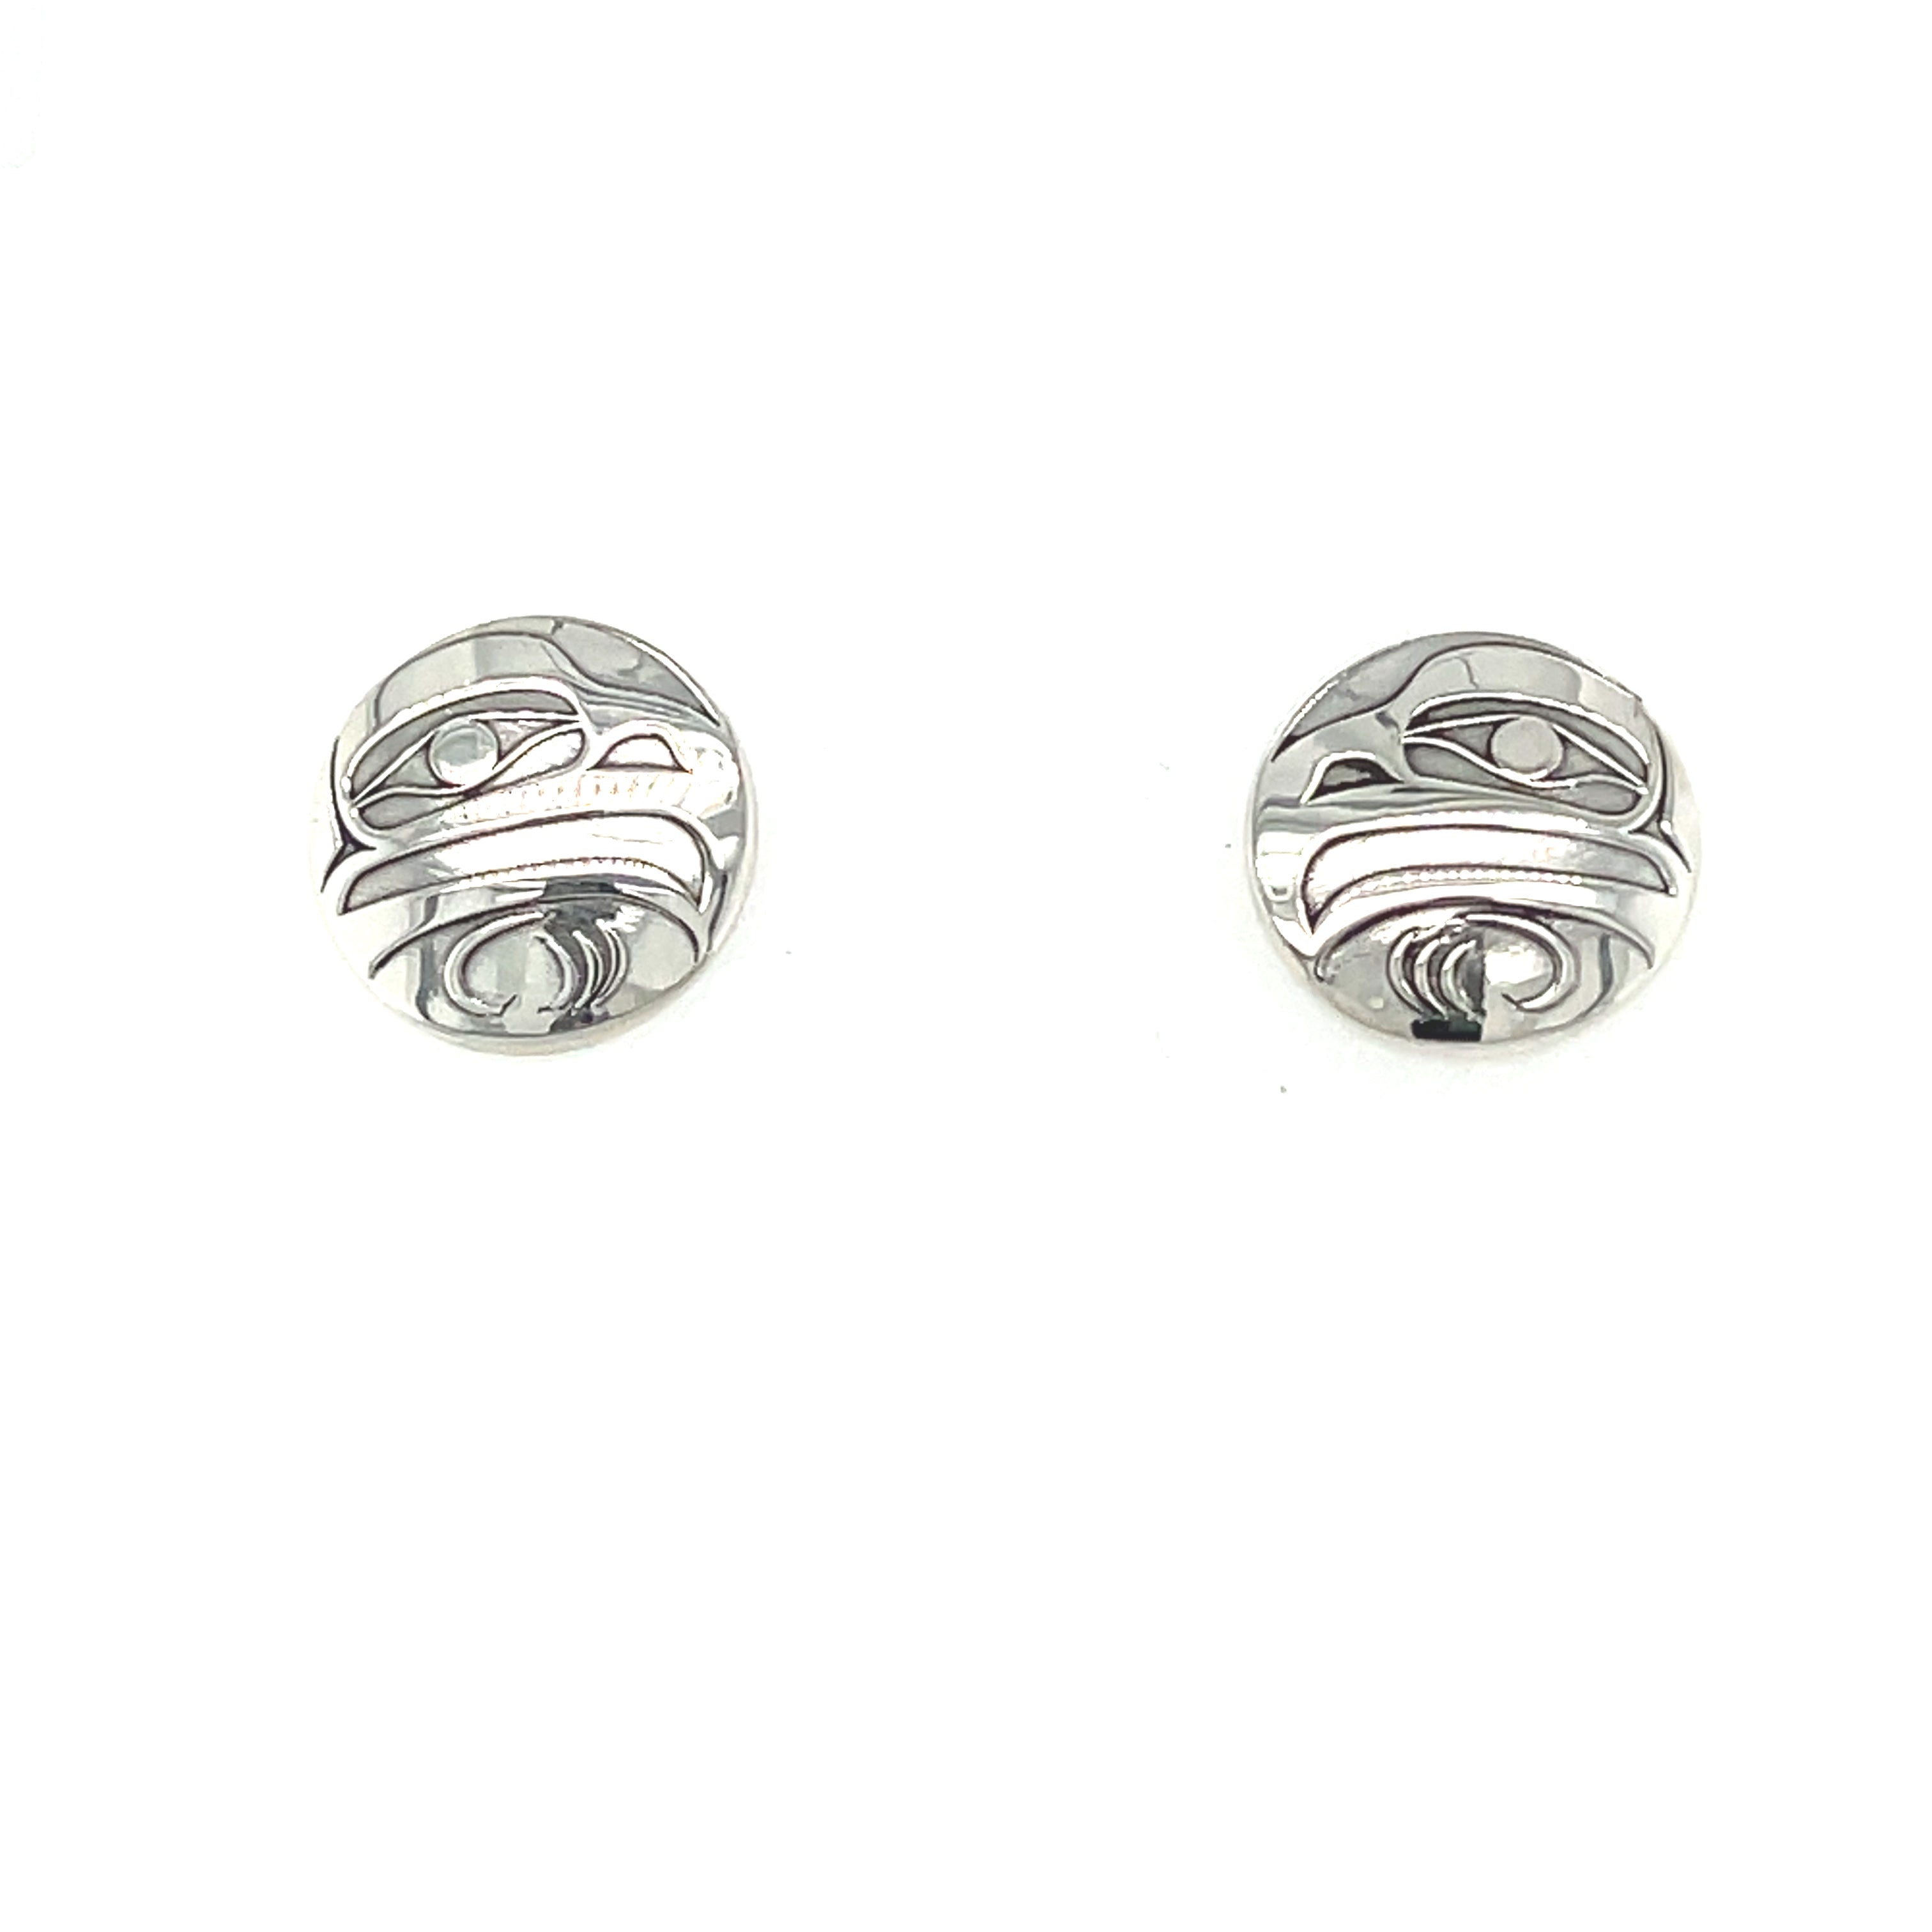 Earrings - Sterling Silver - Round Studs - Eagle